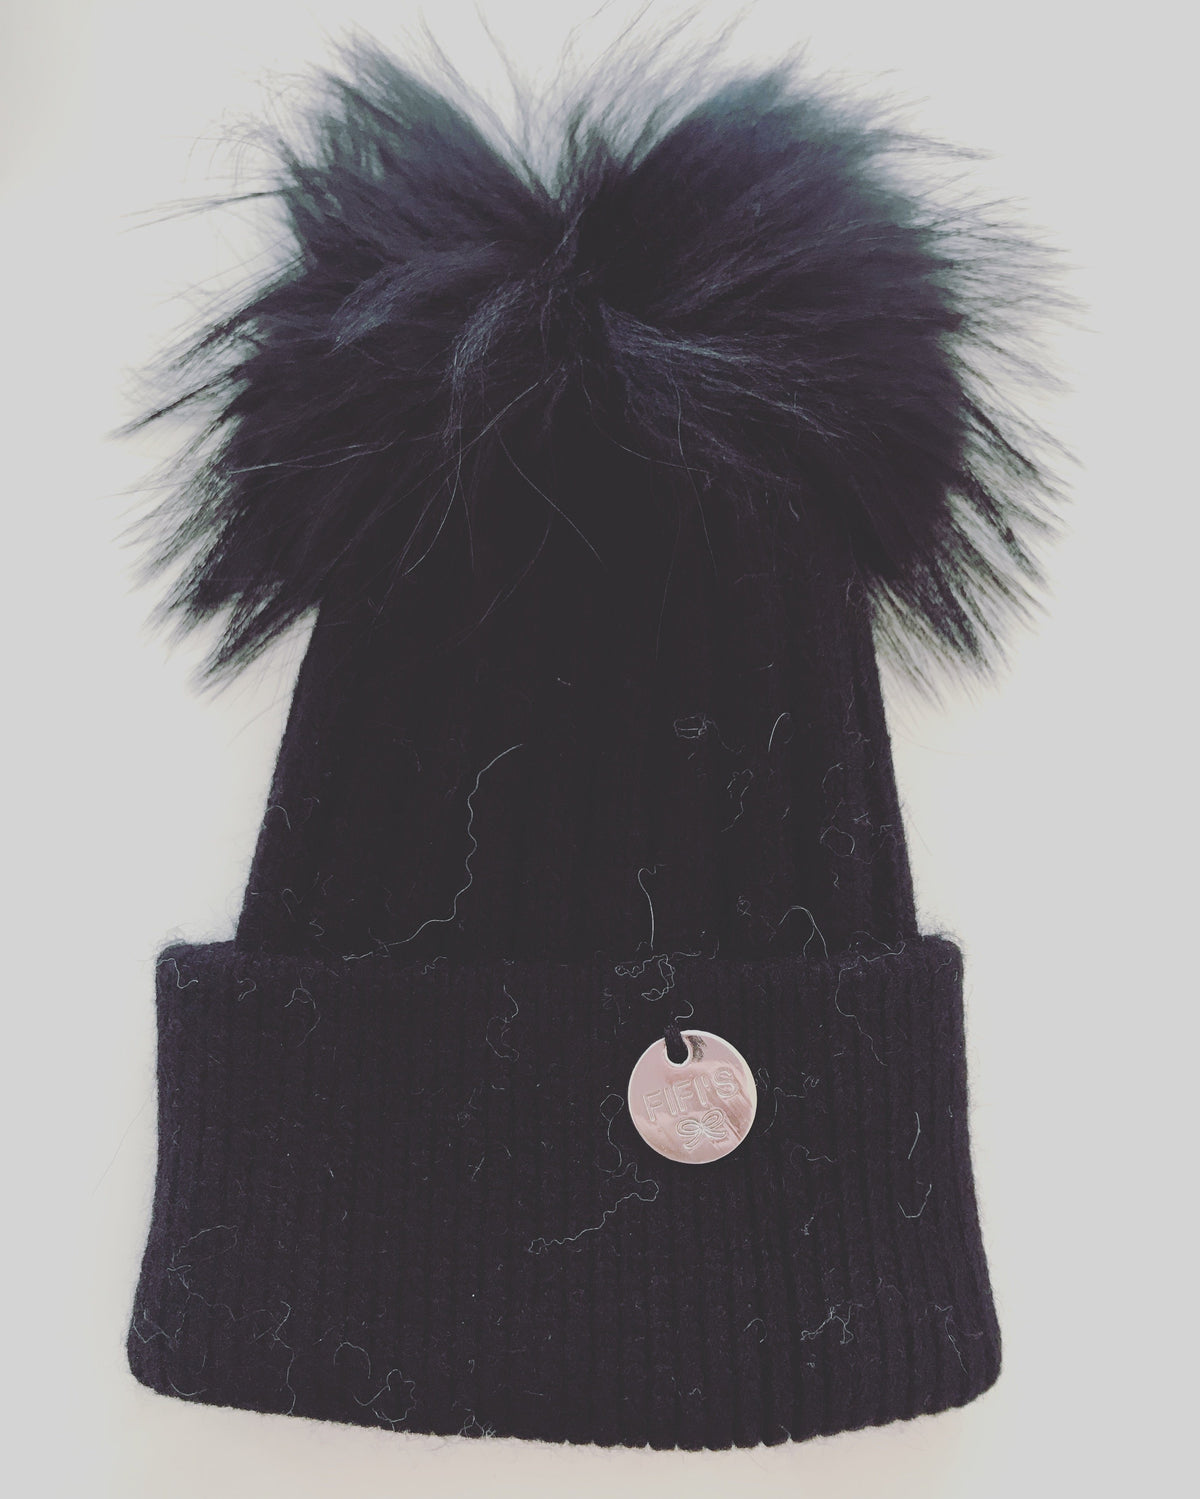 Baby Cashmere single - Black with matching pom